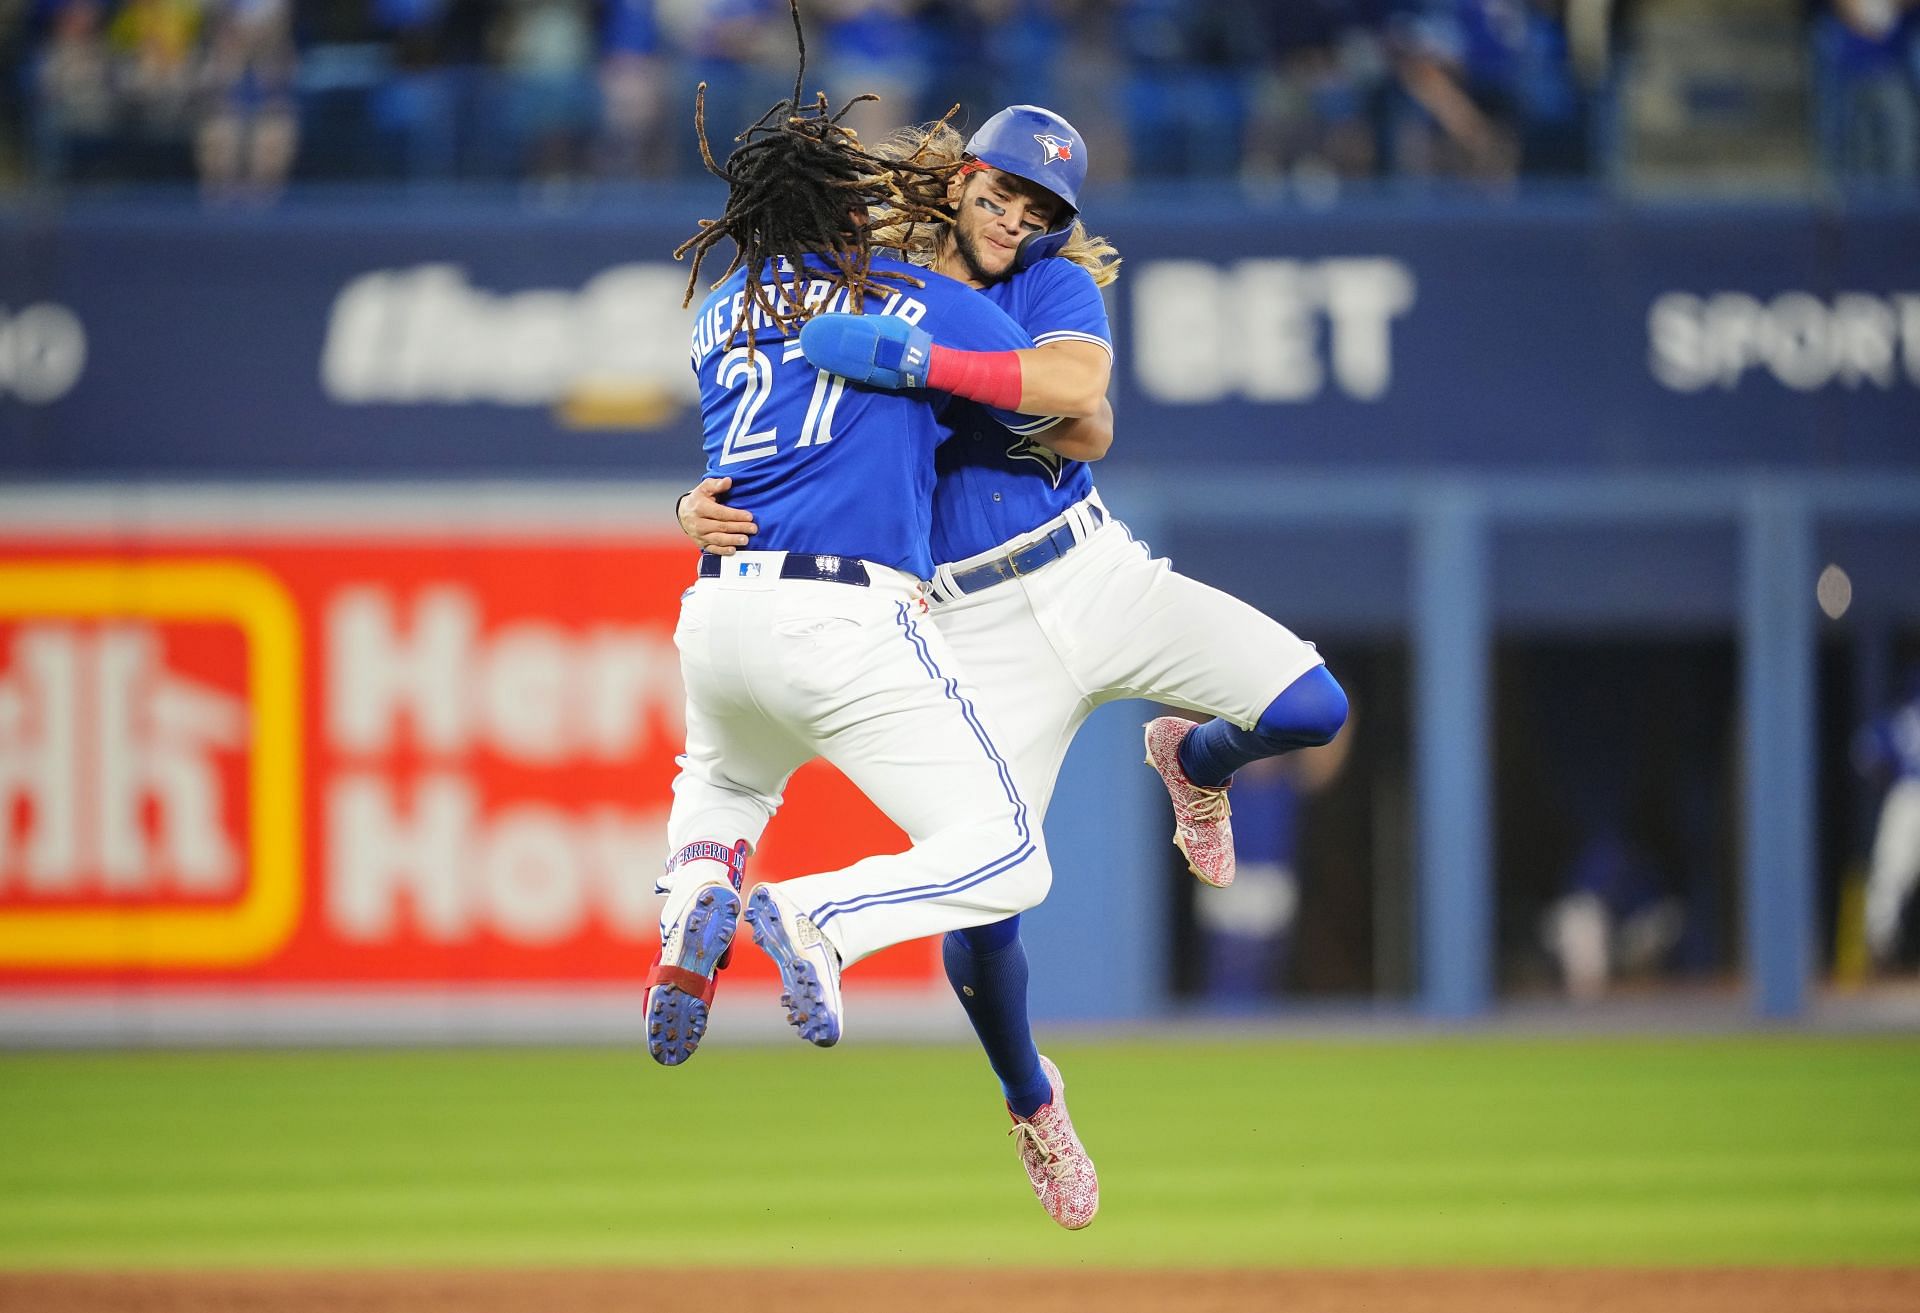 Why Blue Jays might regret playing hardball with Bichette contract